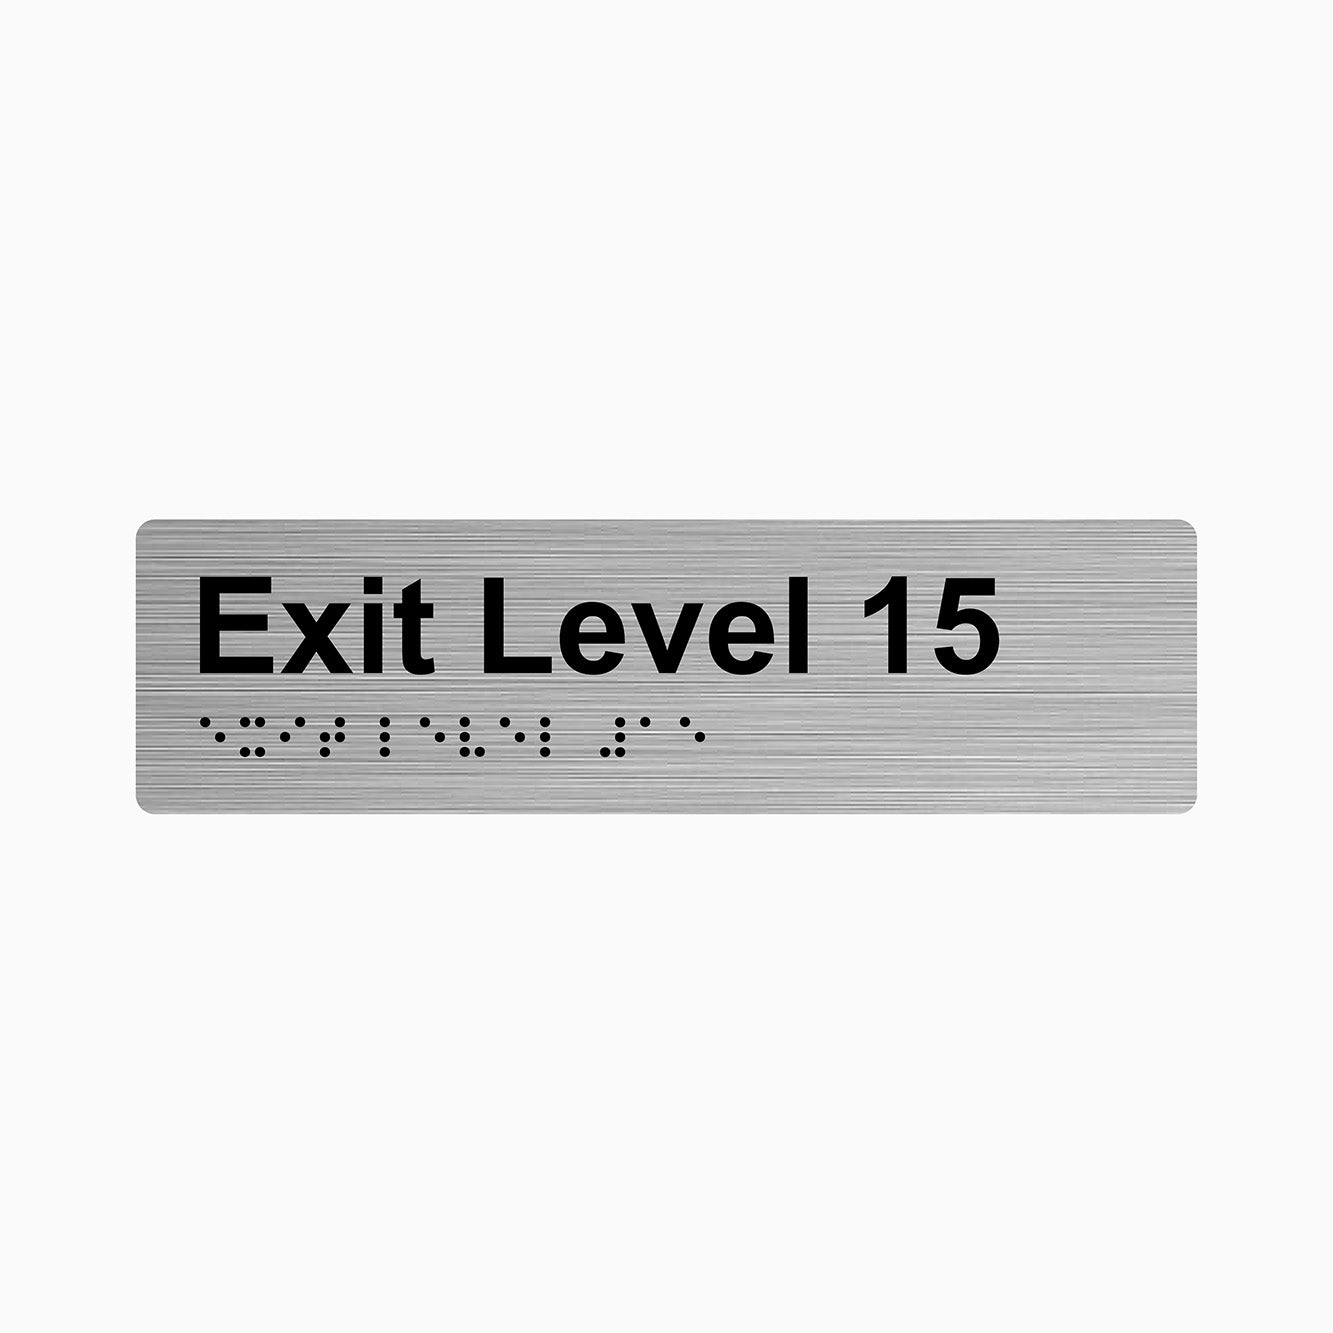 Exit Level 15 -Braille and tactile sign